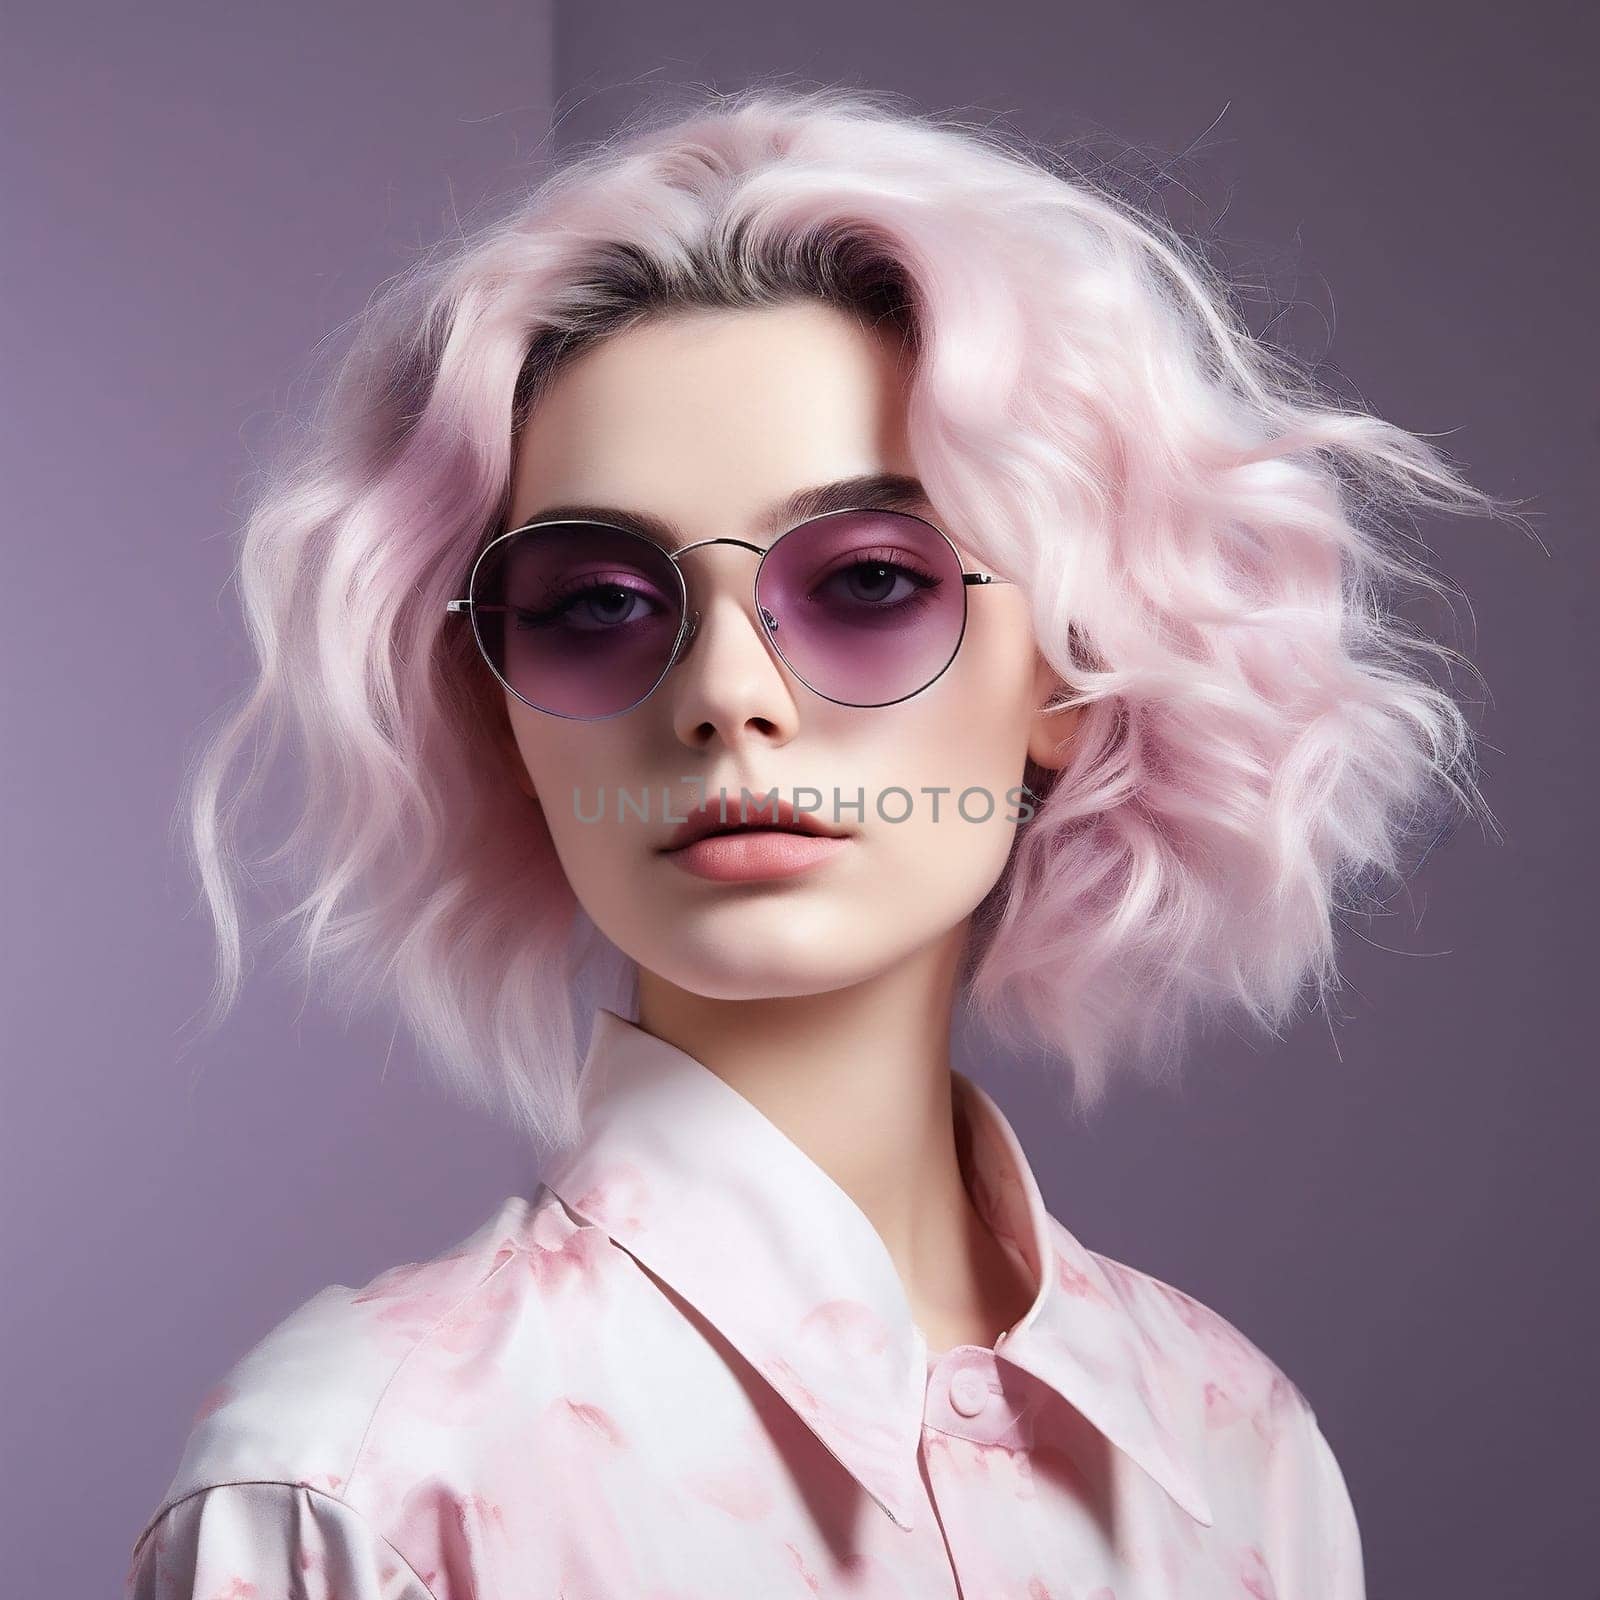 Face woman female stylish beauty portrait model caucasian attractive trendy makeup vogue pink pretty fashionable glamour styling young lady hair person